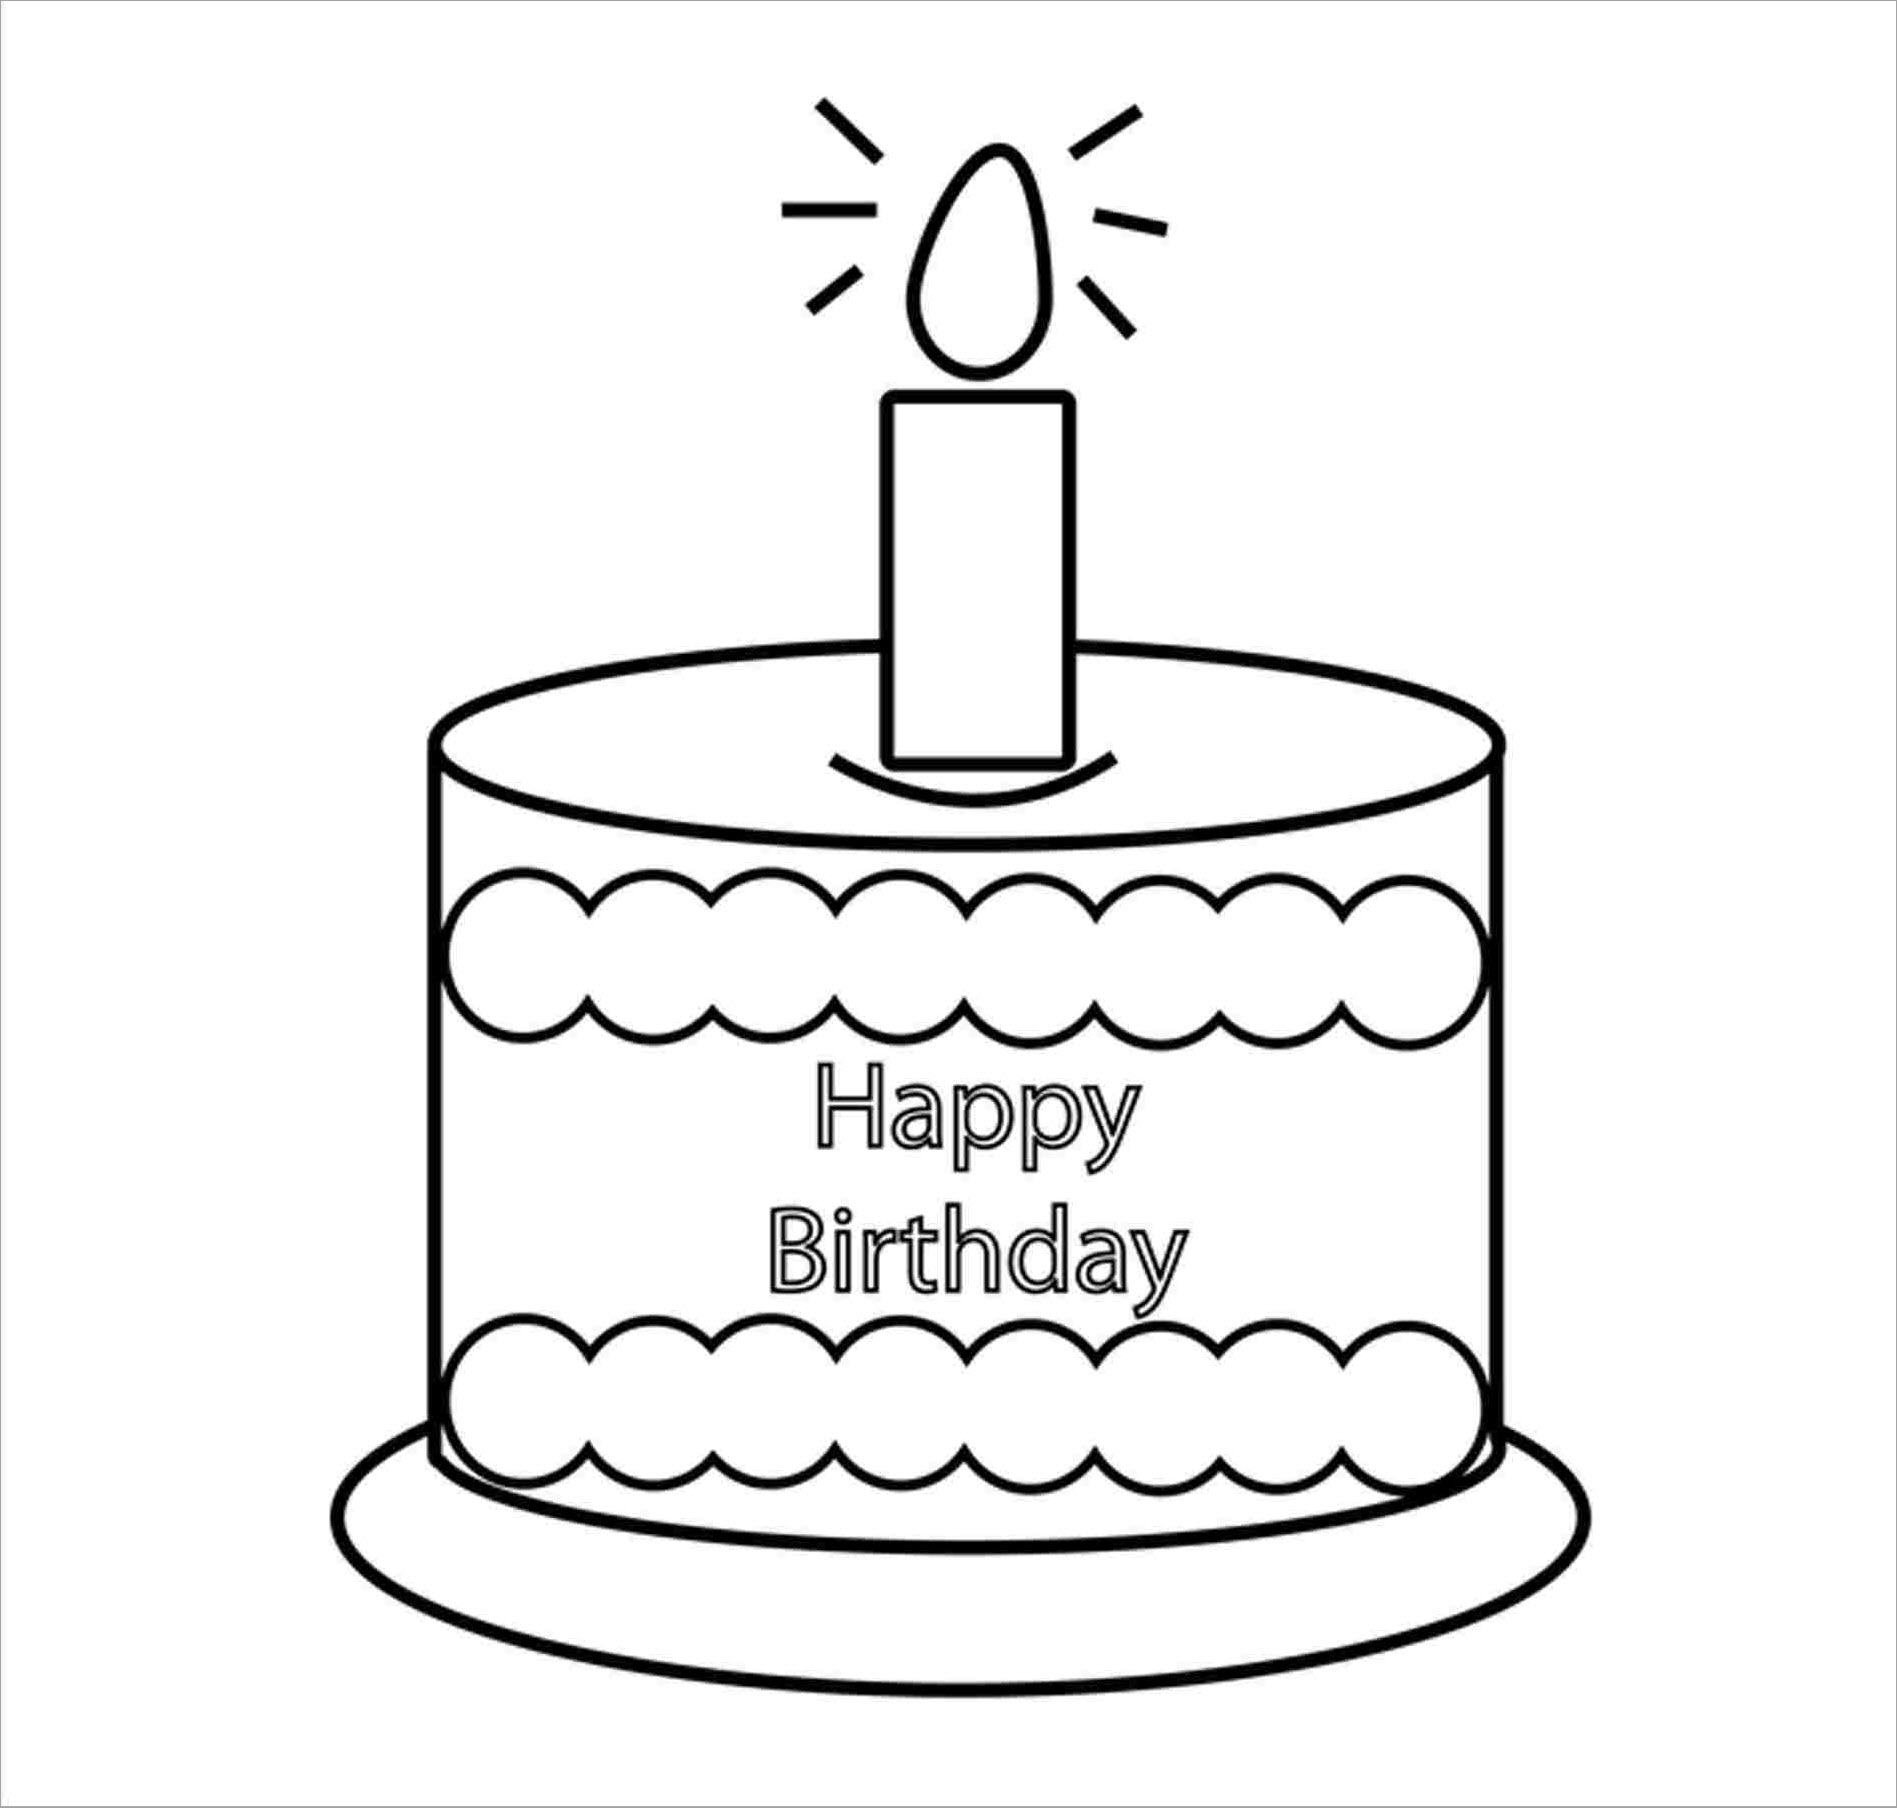 Cake theme coloring page